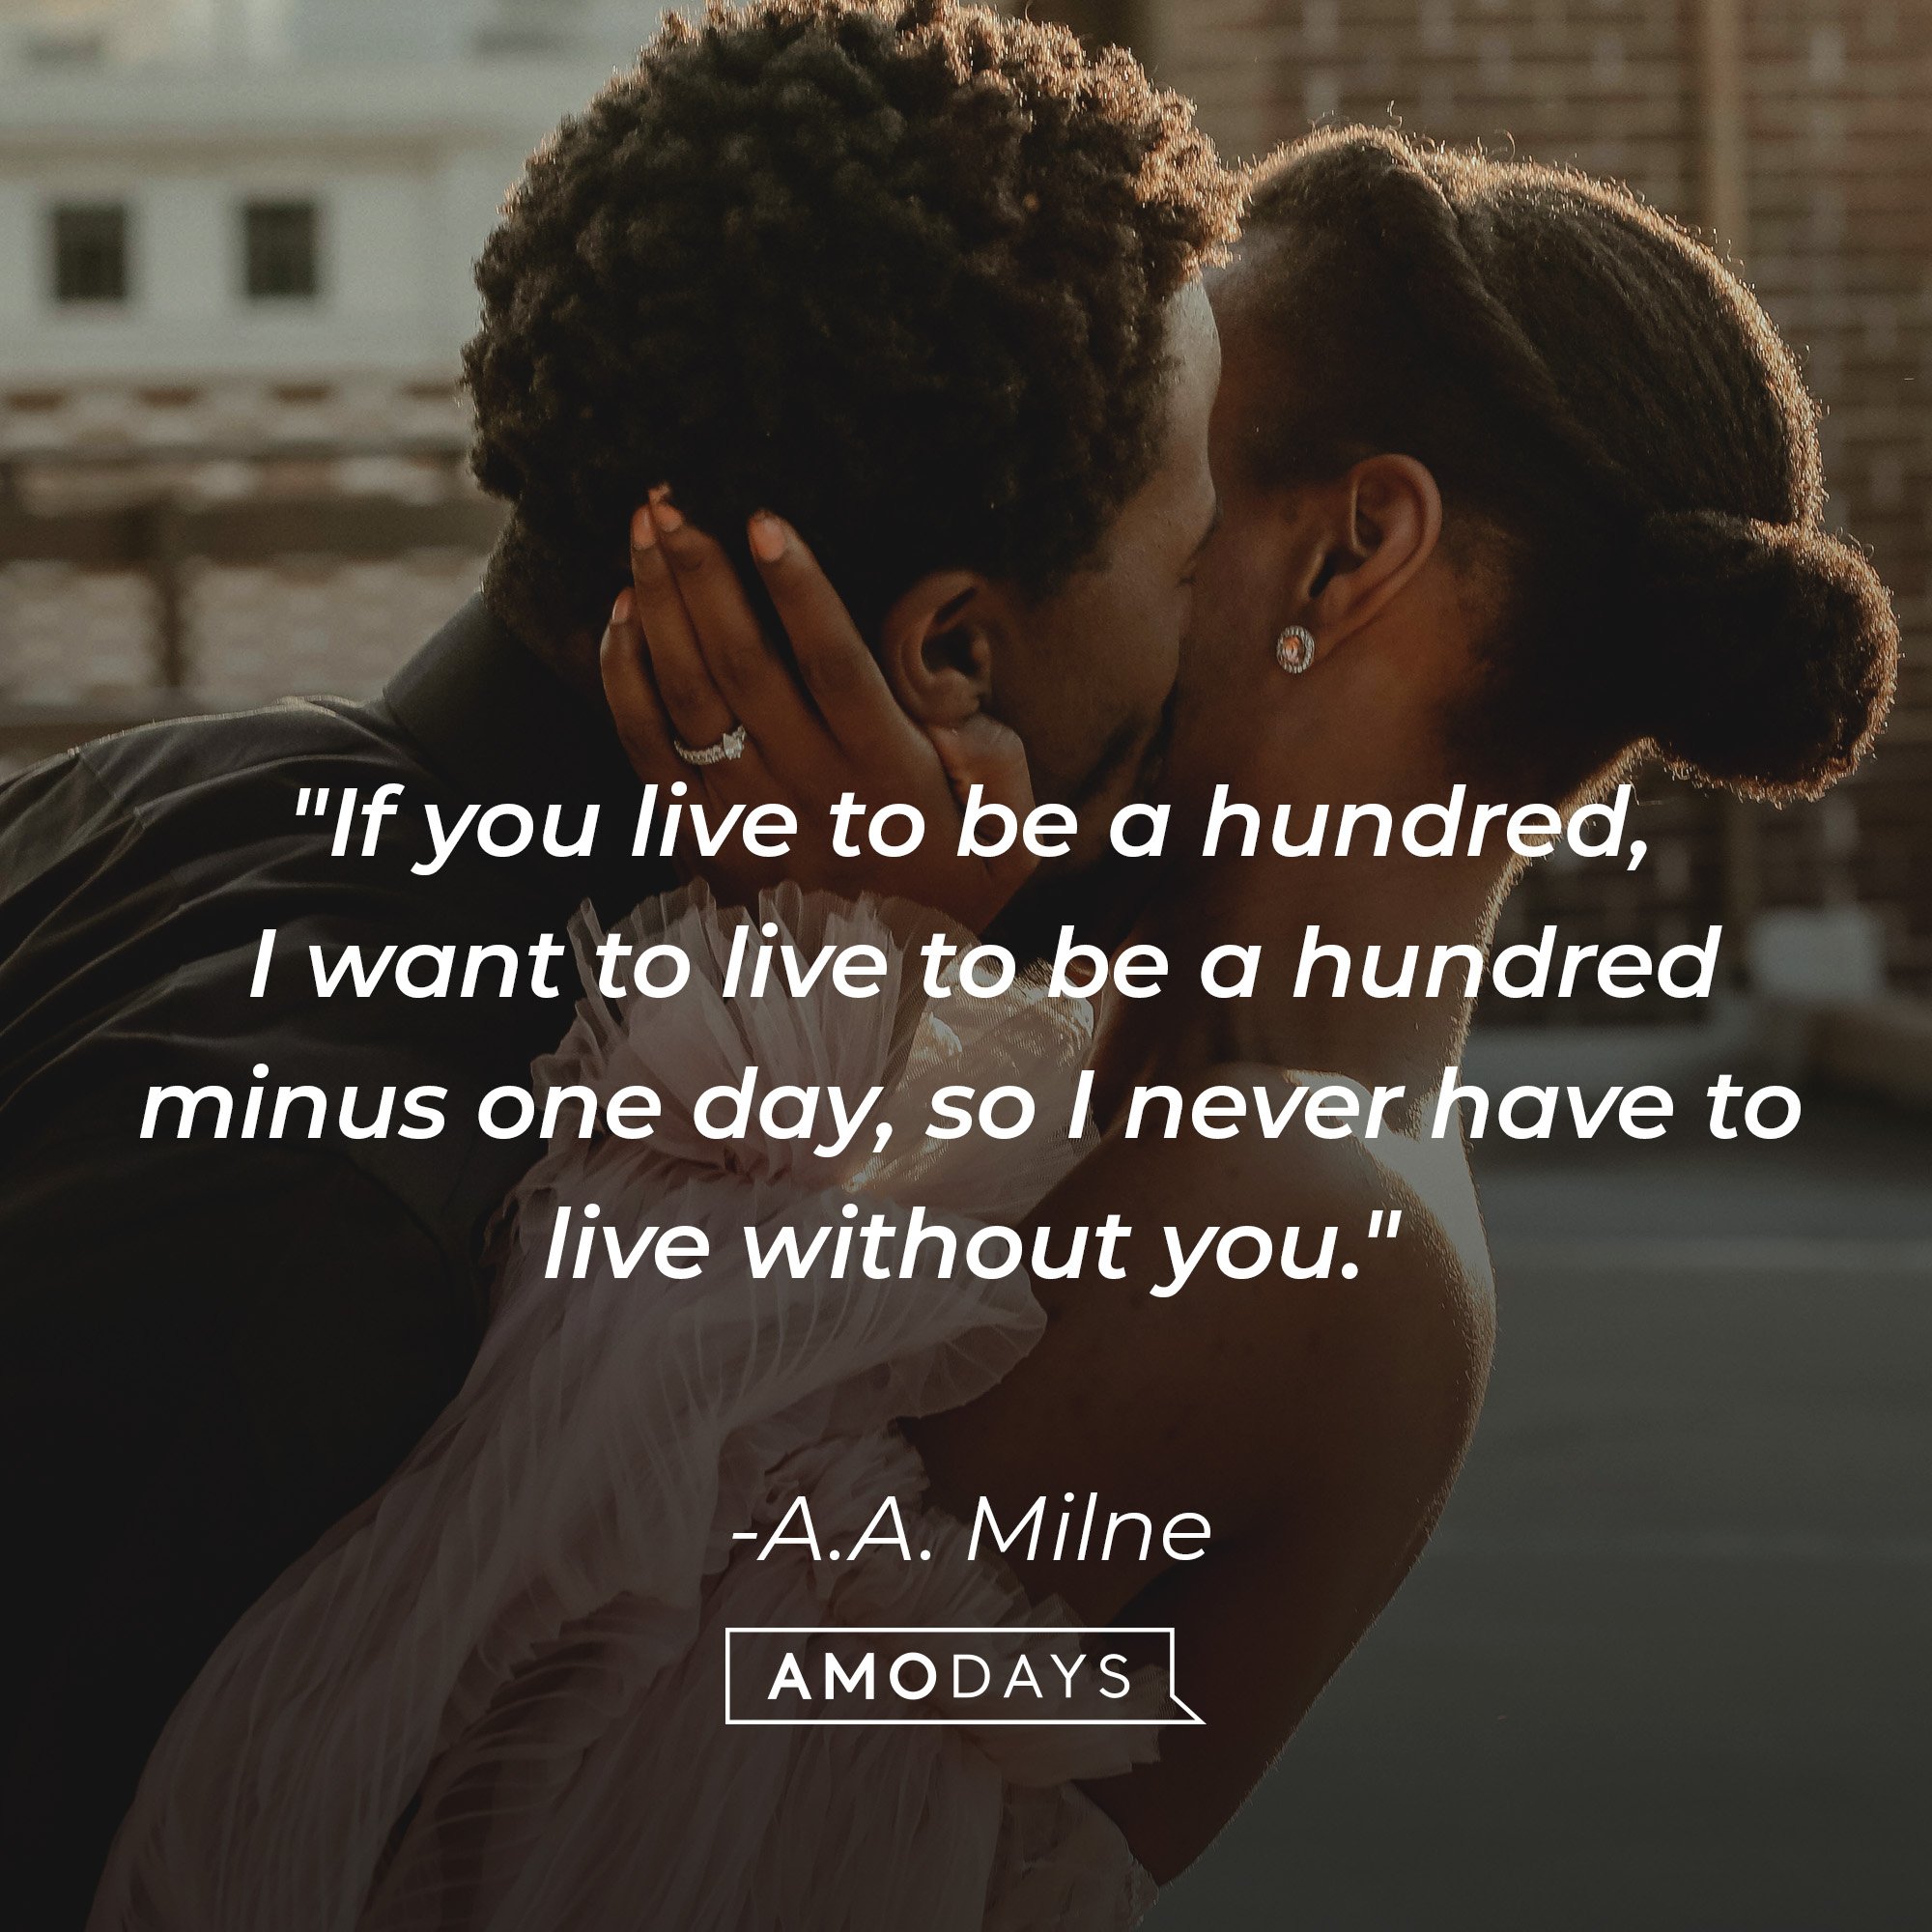 A.A. Milne's quote: "If you live to be a hundred, I want to live to be a hundred minus one day, so I never have to live without you." | Image: AmoDays